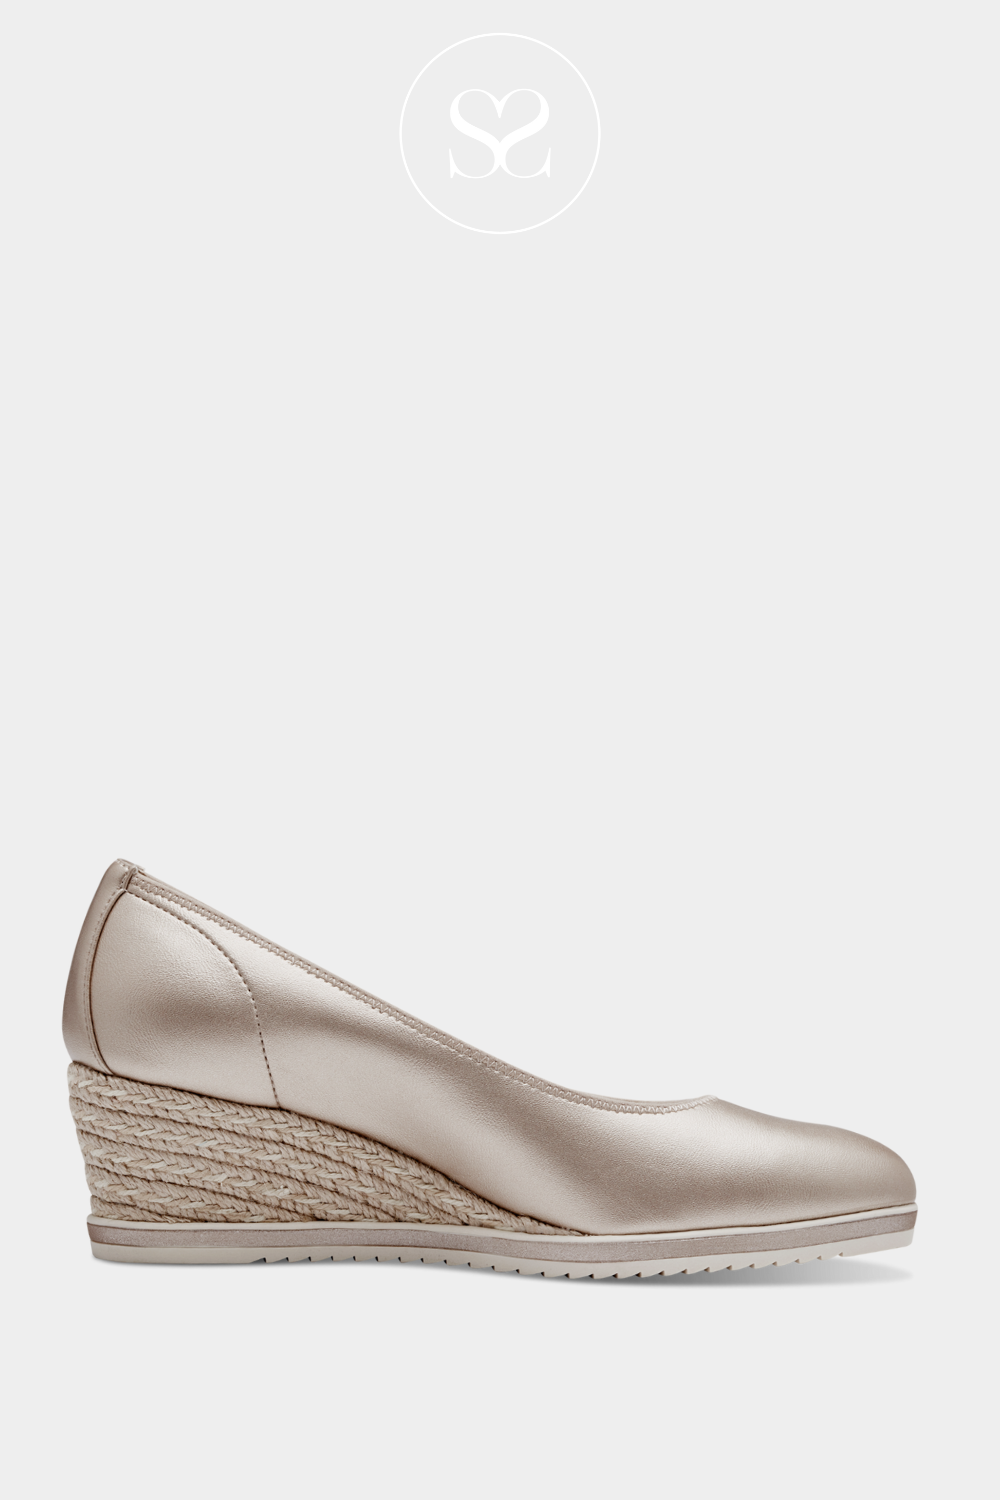 tamaris gold closed toe wedges with espadrille sole